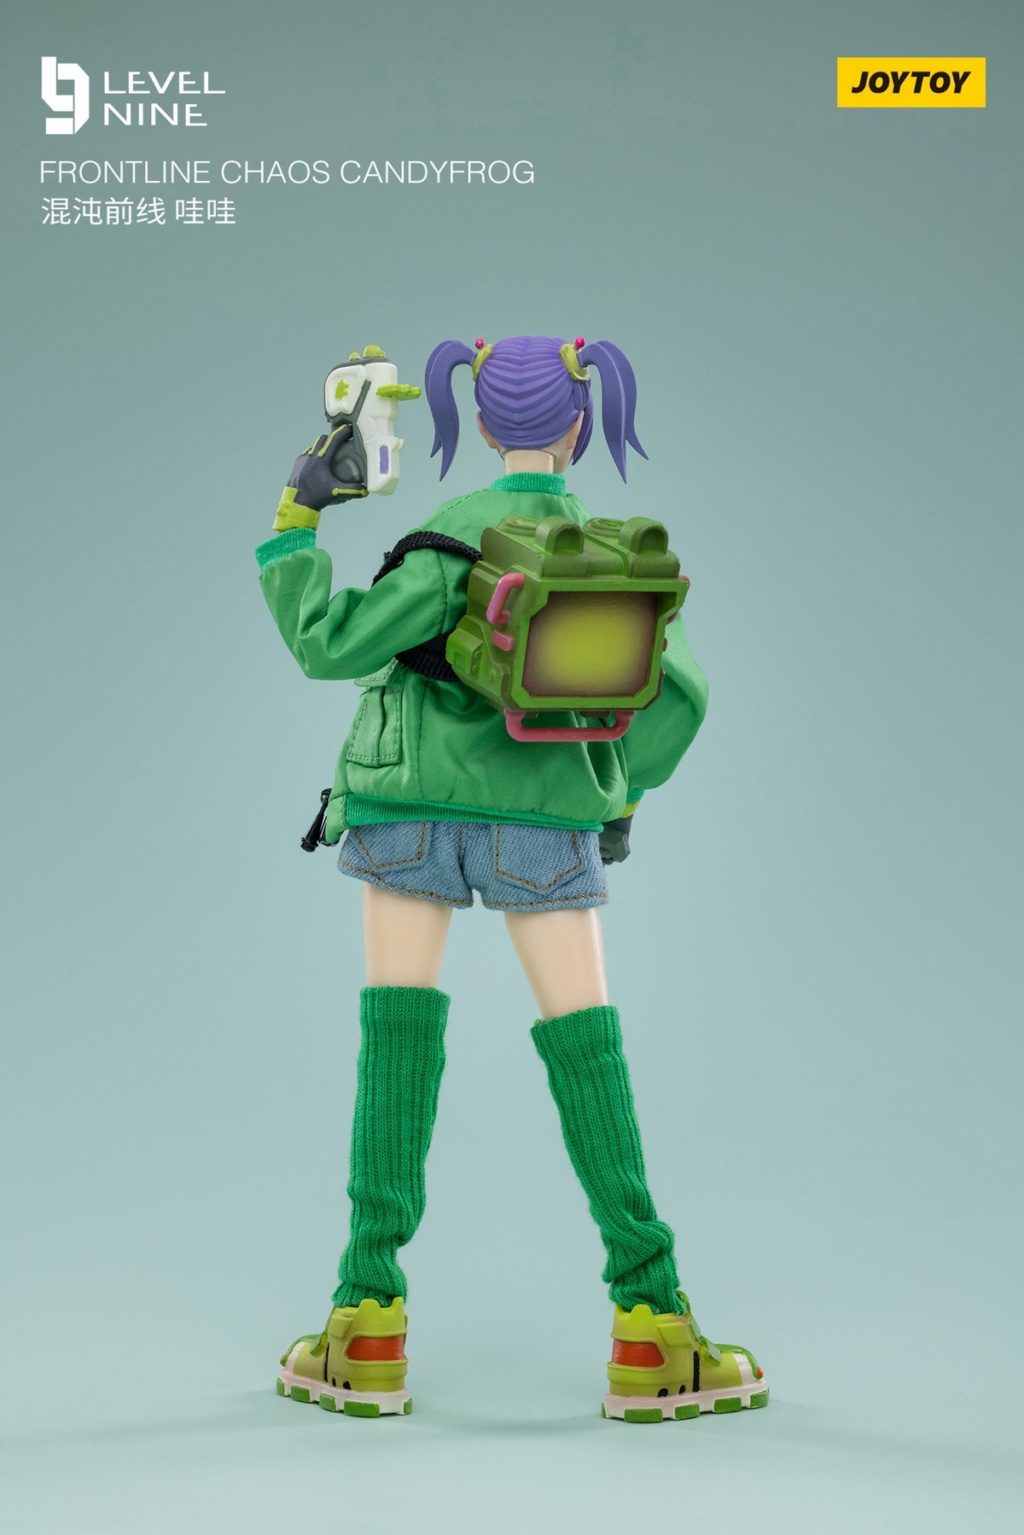 NEW PRODUCT: JOYTOY 1/12 FRONTLINE CHAOS CANDYFROG Chaos Frontline Wow 0275